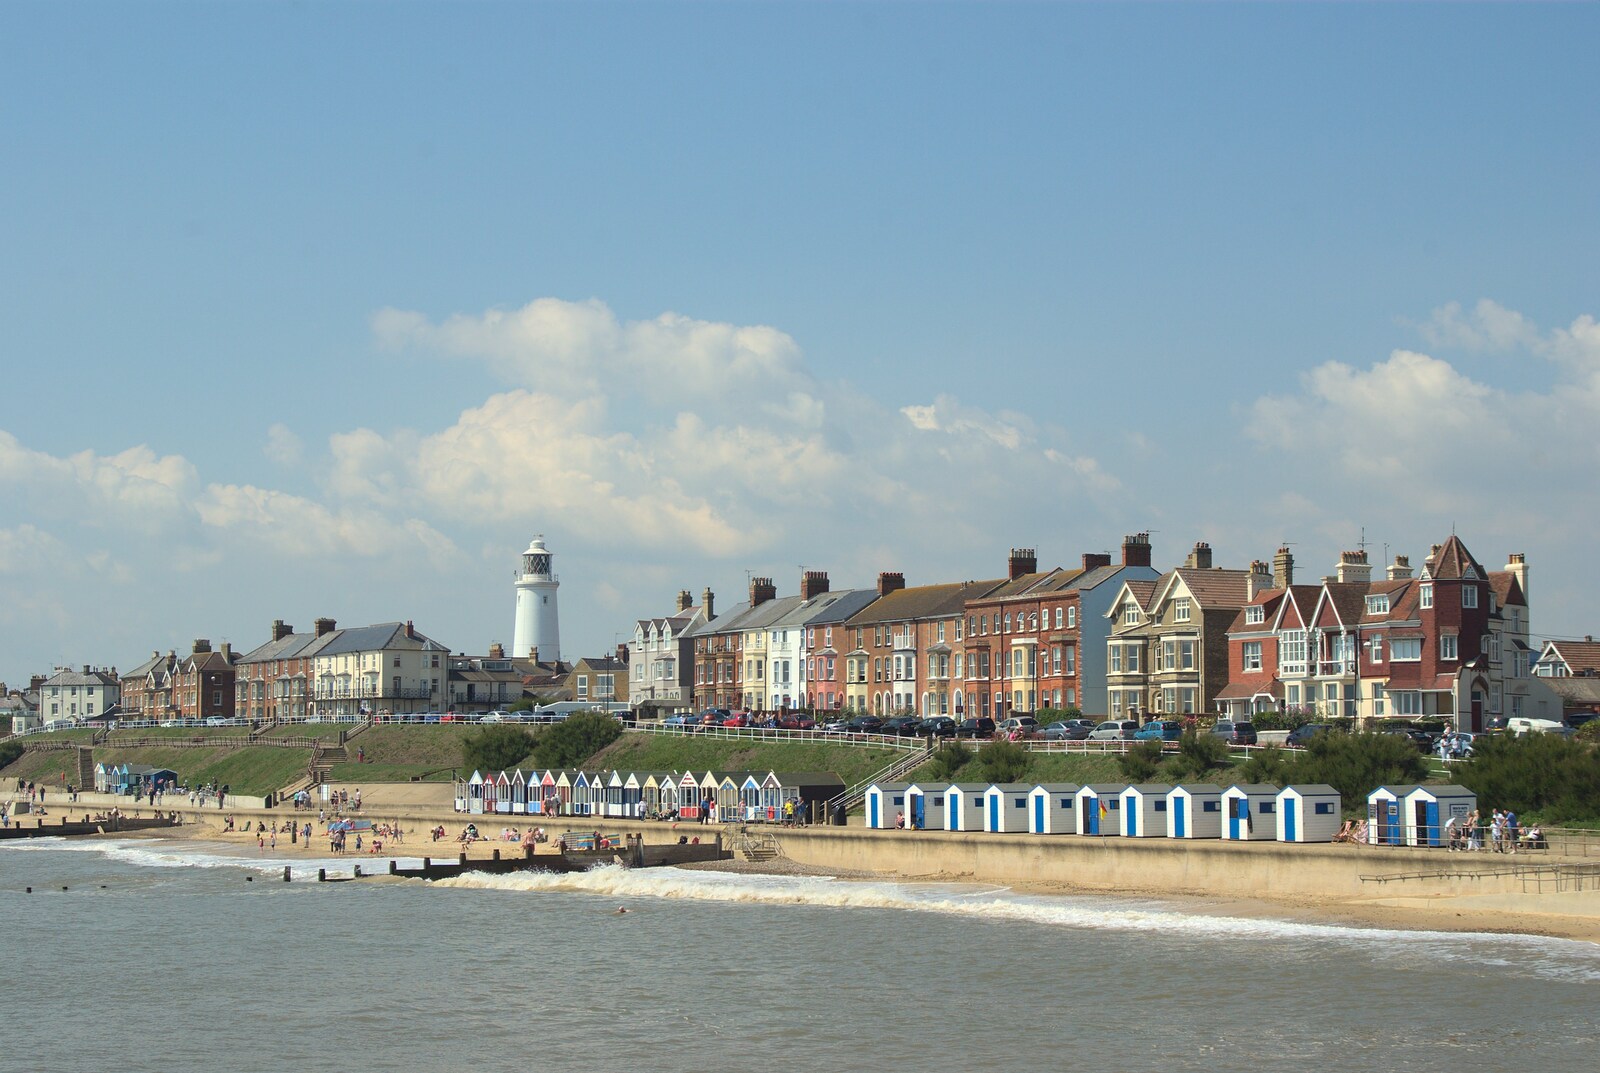 Nice view of Southwold from half-way up the pier from The First Anniversary, Southwold, Suffolk - 3rd July 2011